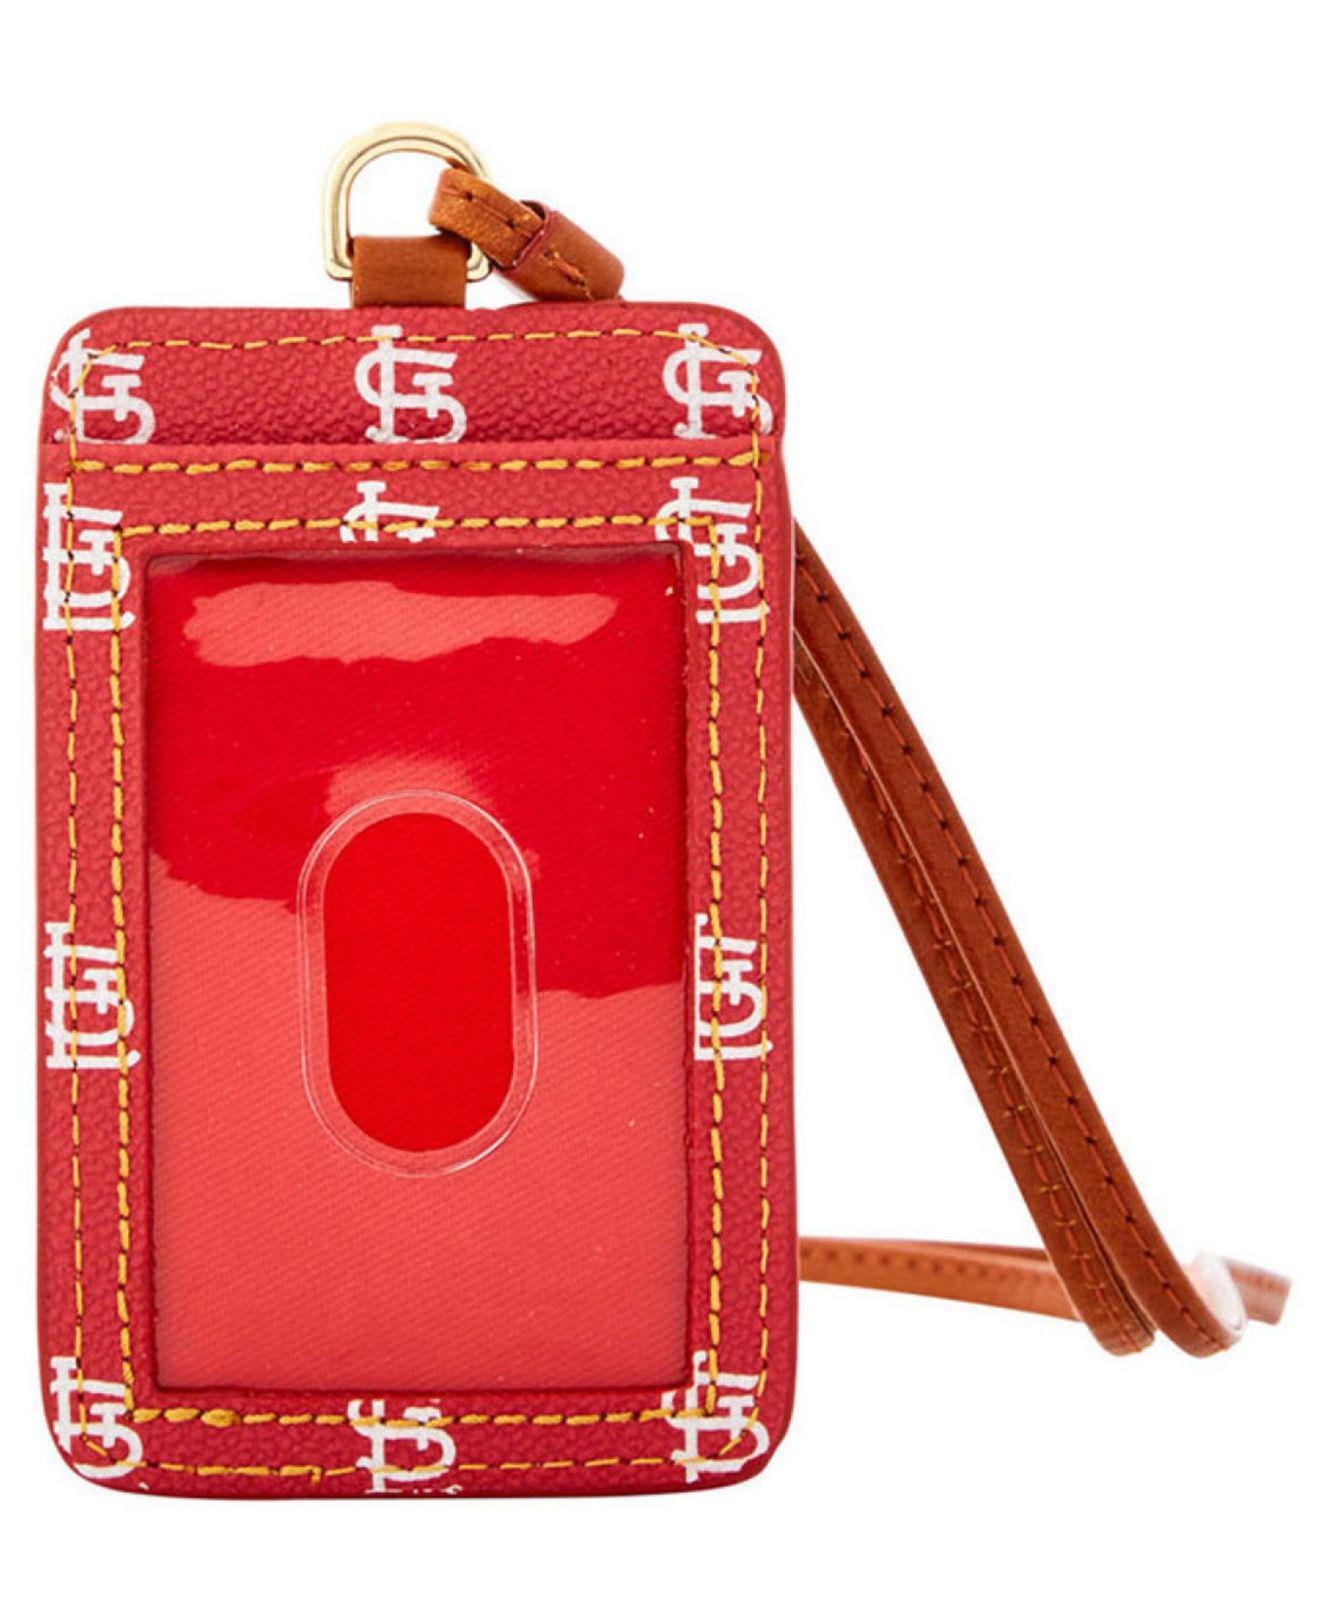 St Louis Cardinals Phone Cases - iPhone and Android